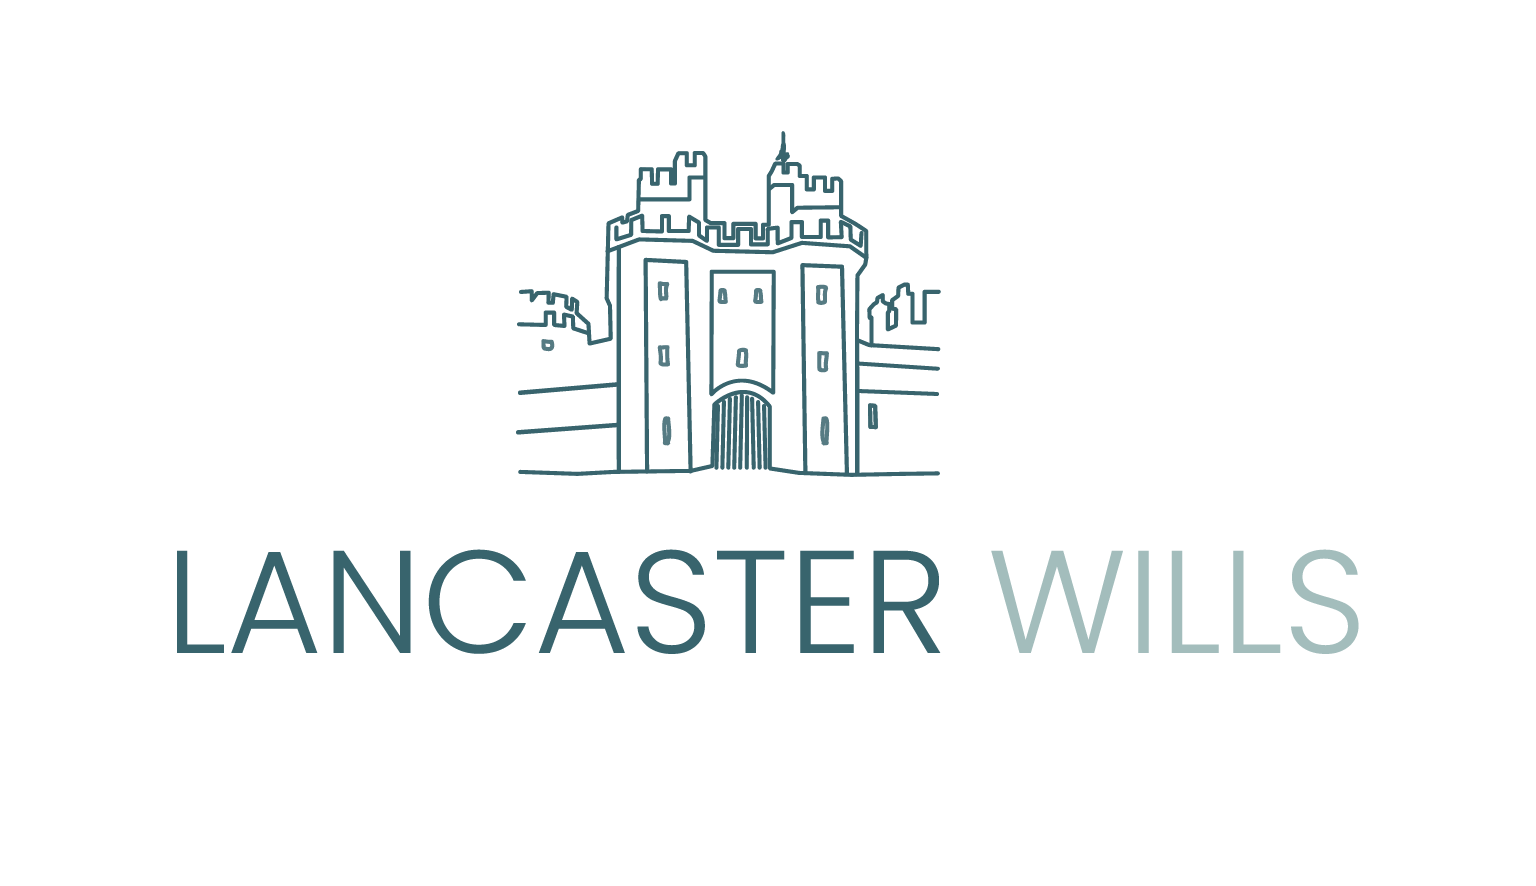 Lancaster Wills is now part of the Morecambe Bay Wills family!